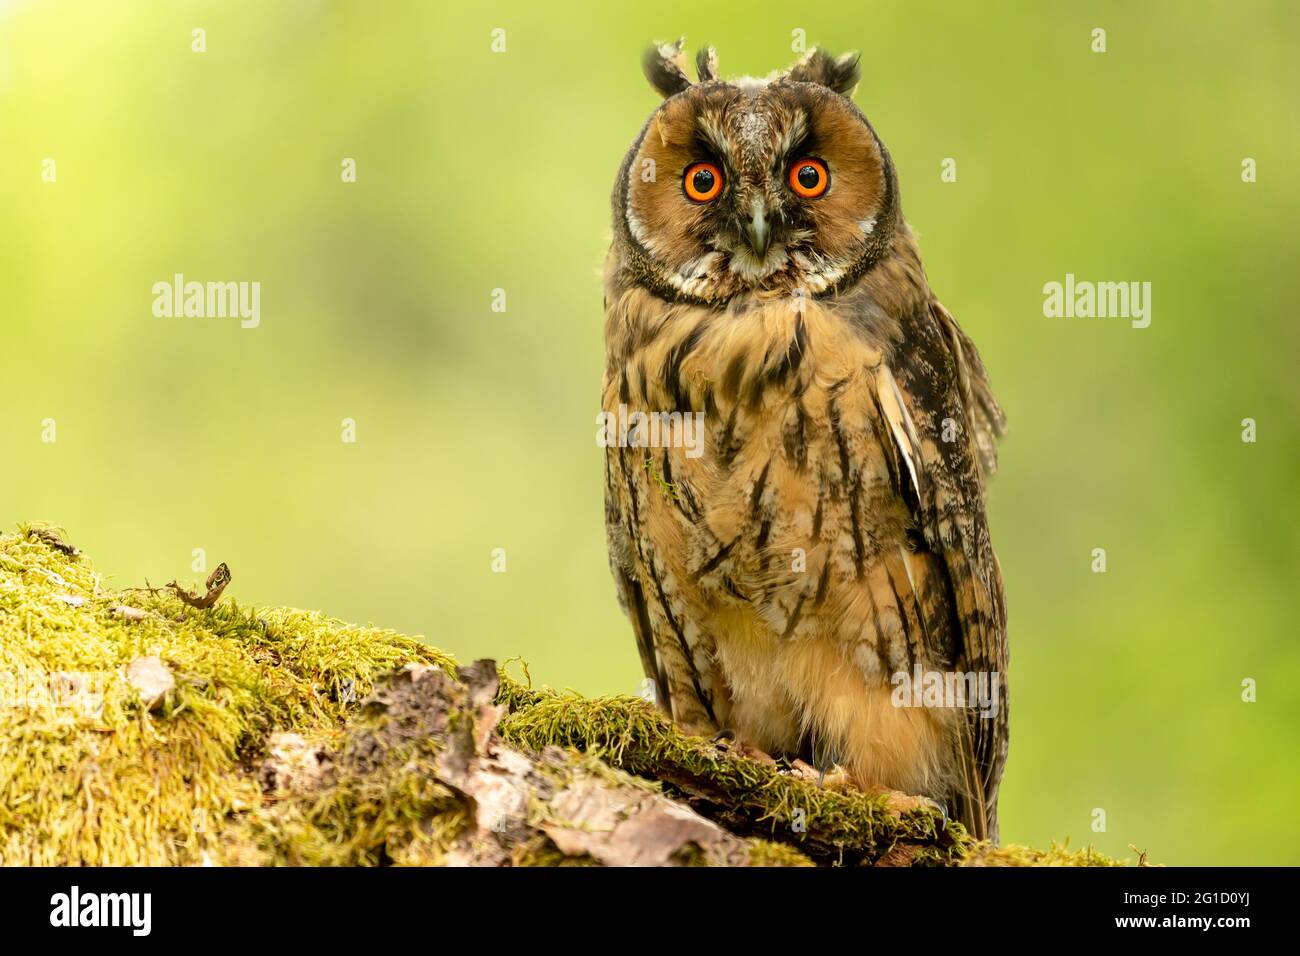 Long eared owl, juvenile.  Scientific name: Asio otus.  Close-up of a young, long eared owl perched on a mossy green log and facing forward.  Clean ba Stock Photo